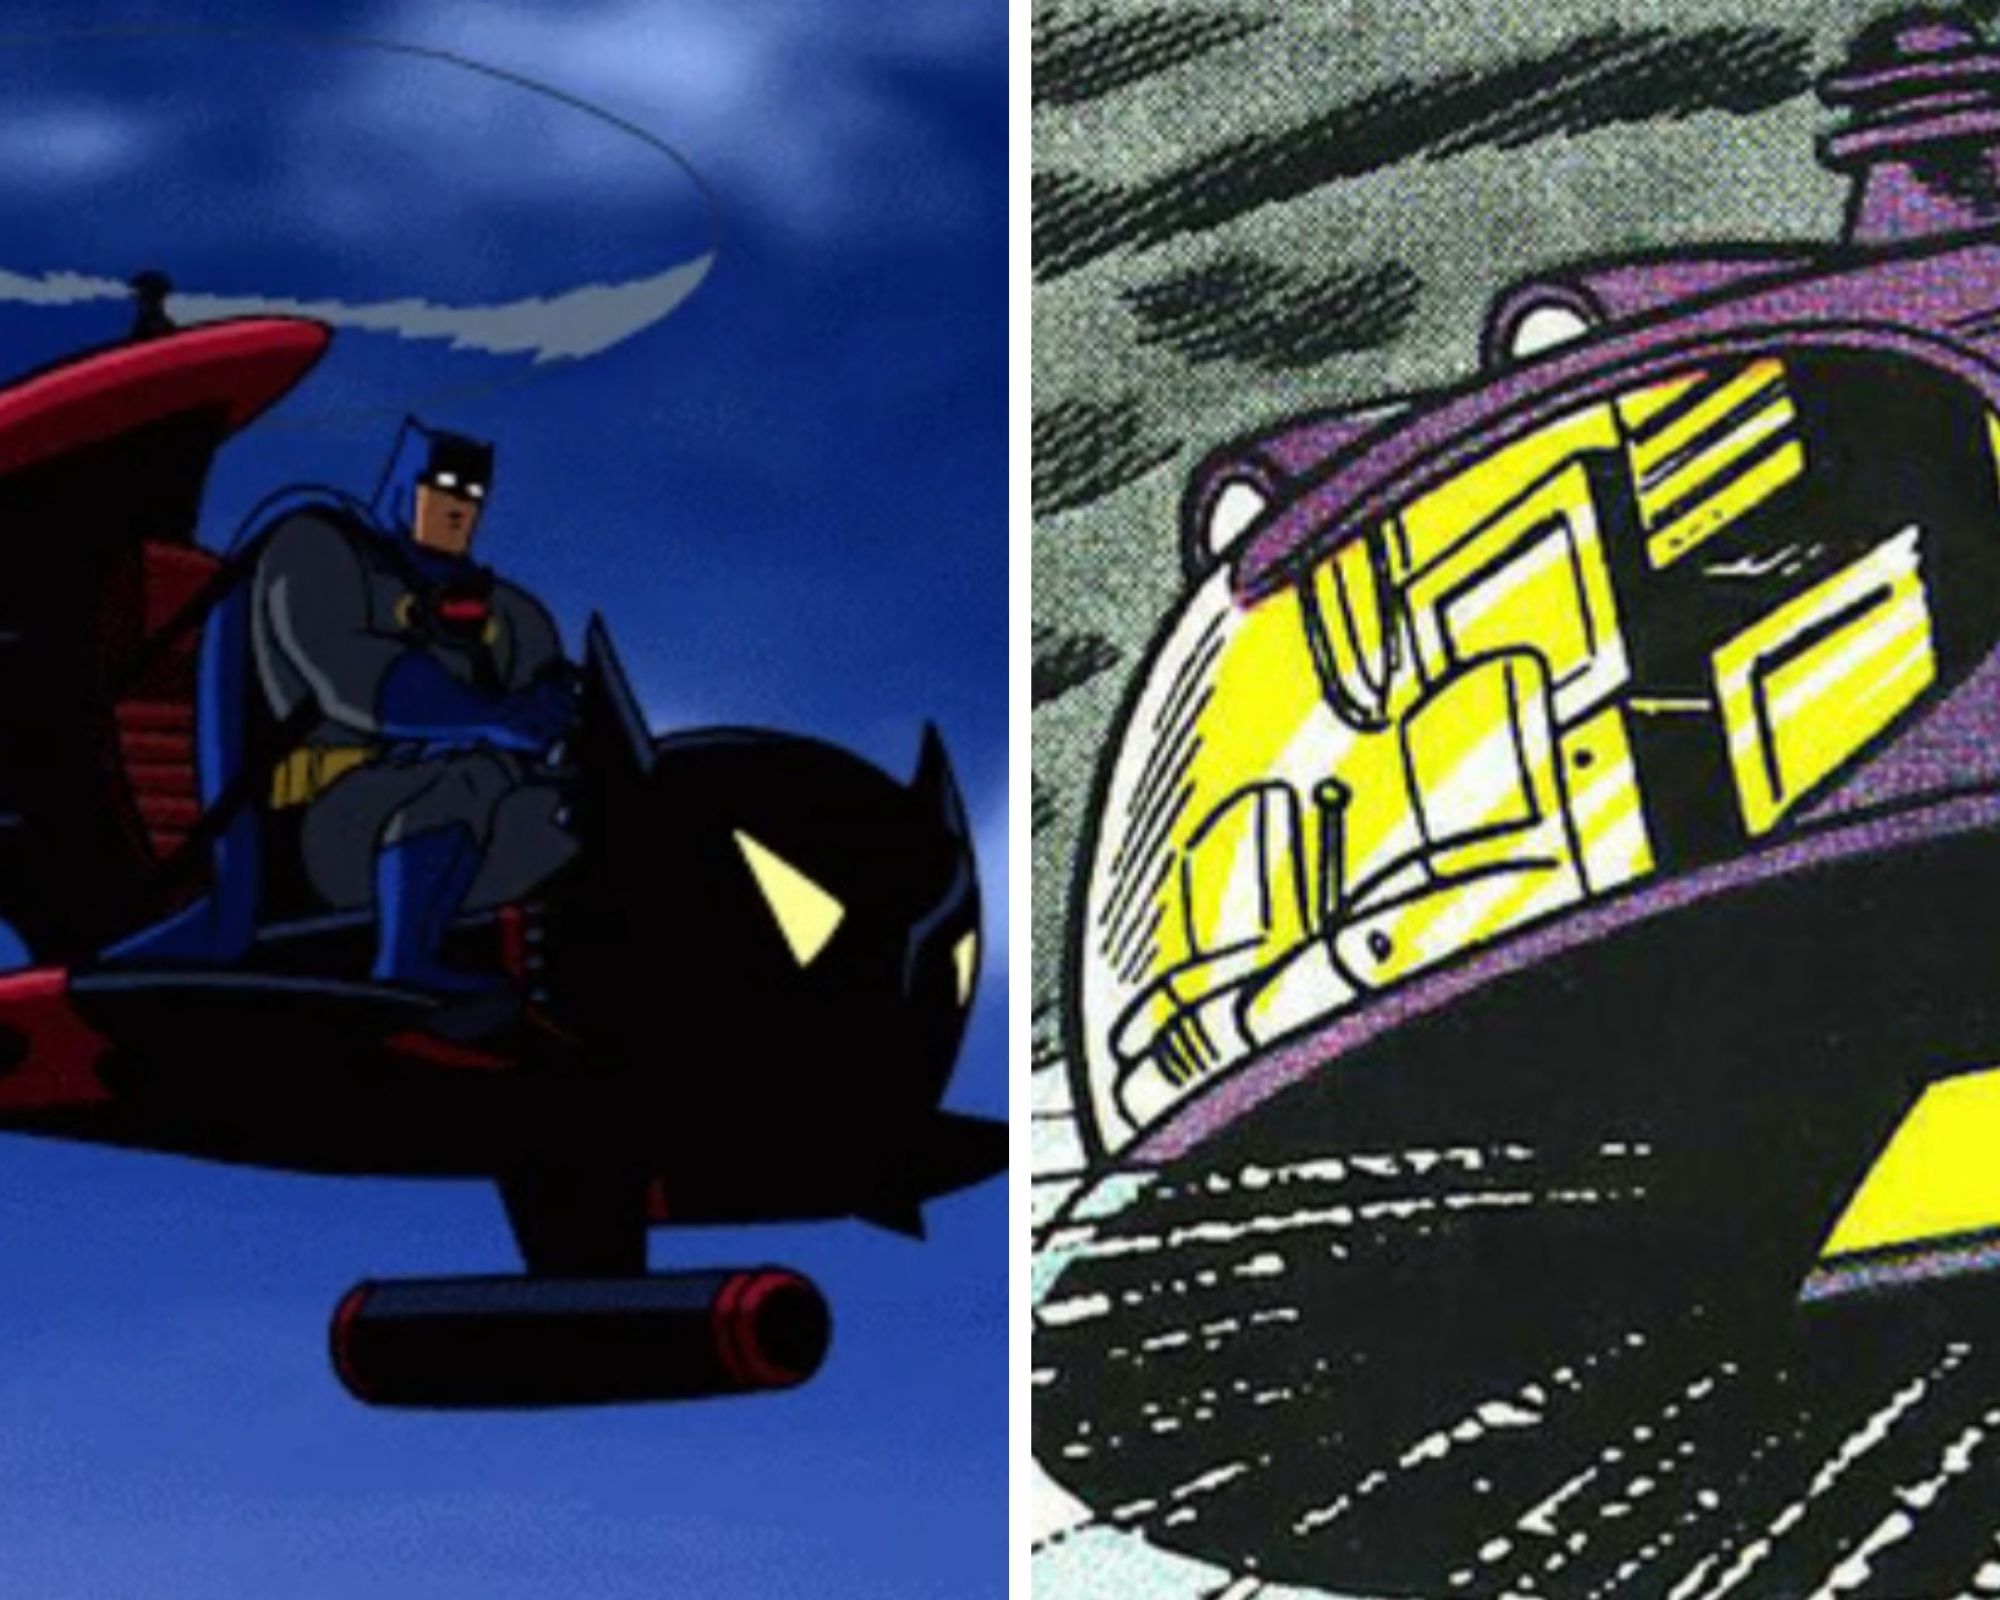 Flying Batcave and Whirly-Bat